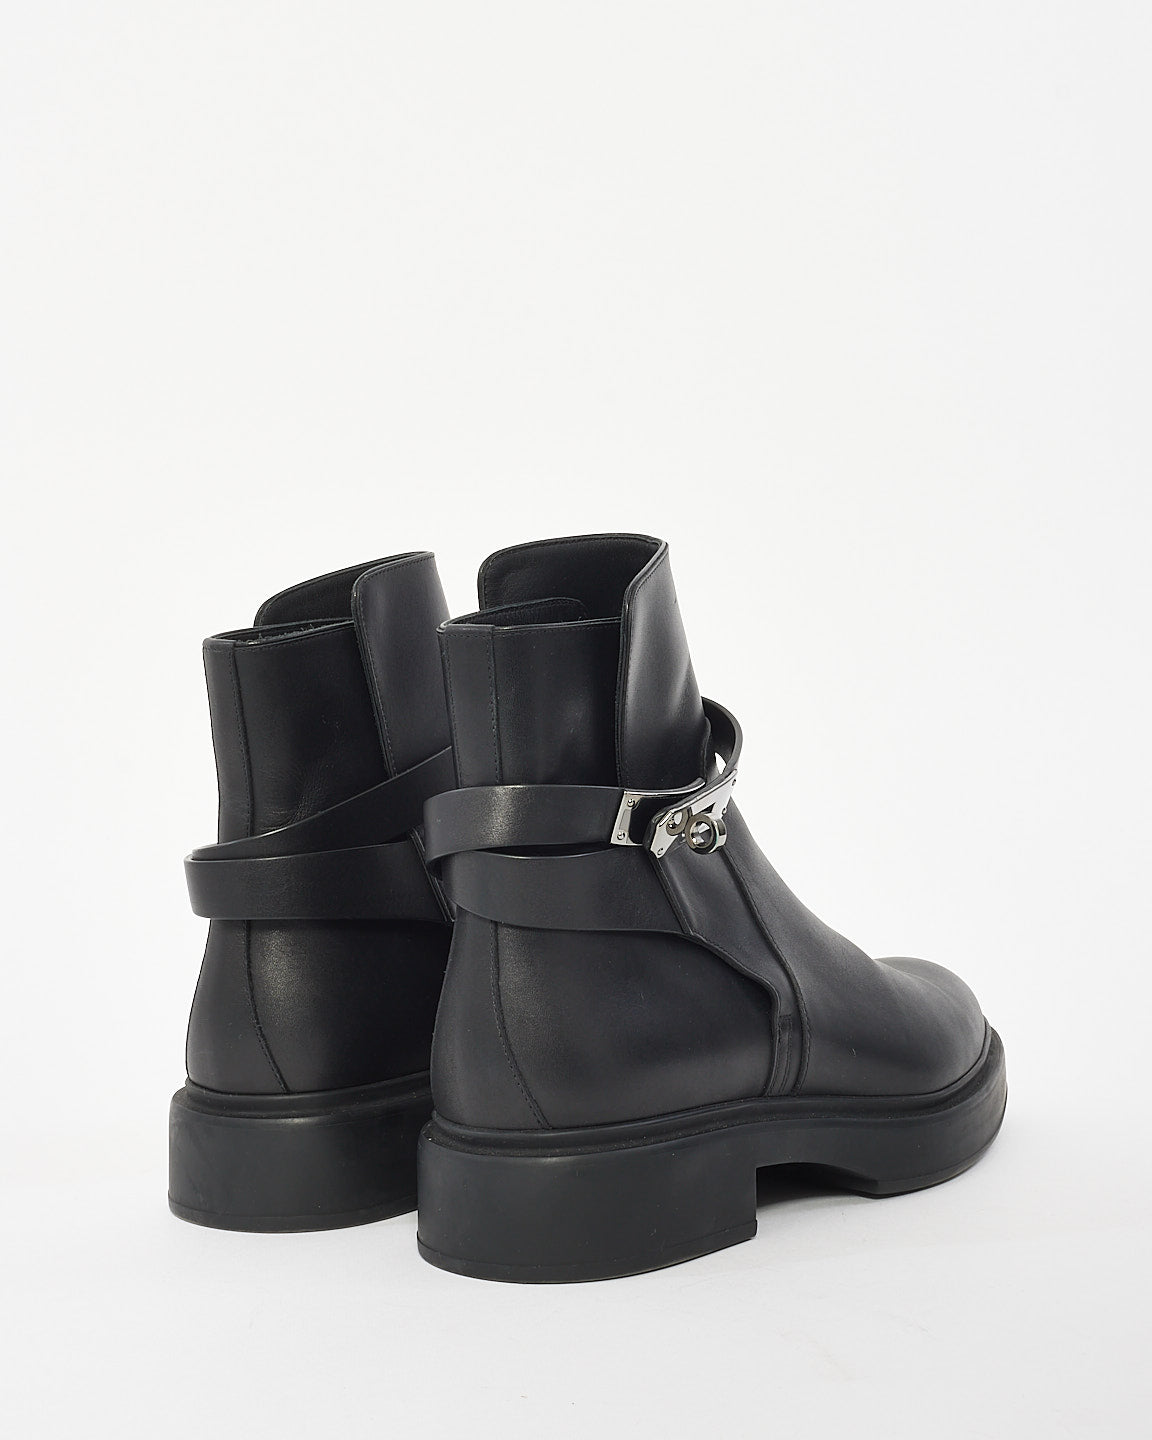 Hermès Black Leather Veo Ankle Boots - 39